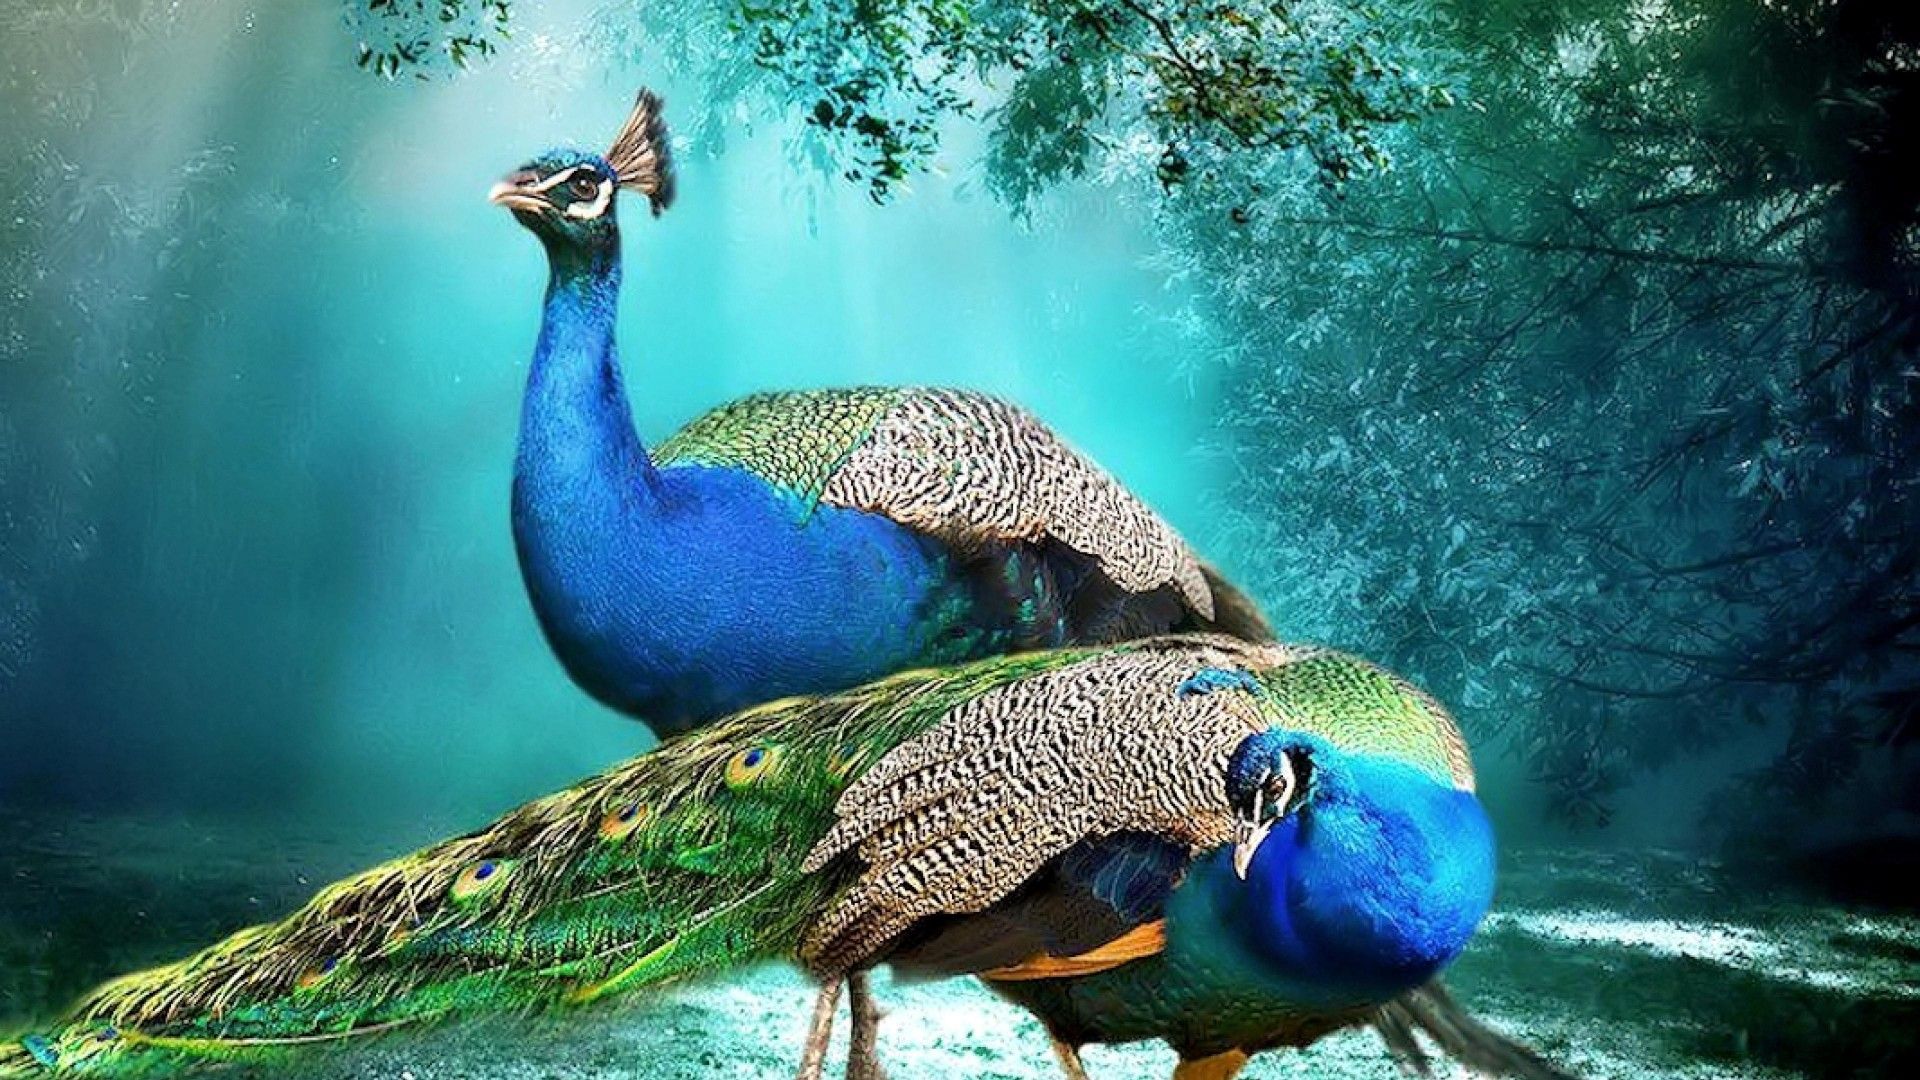 peacock images free hd